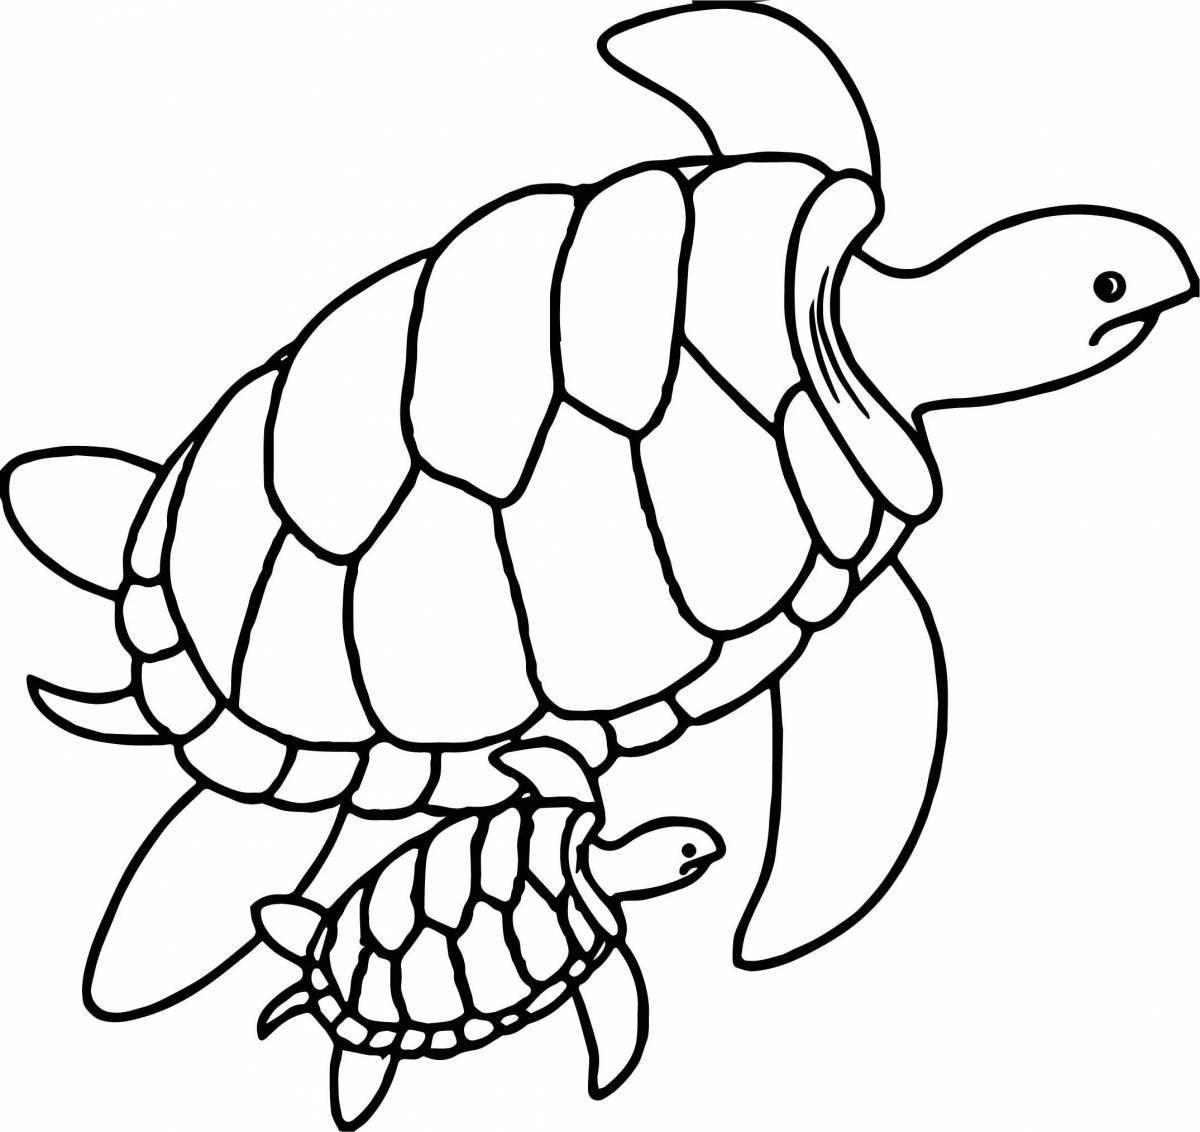 Colorful turtle coloring book for kids